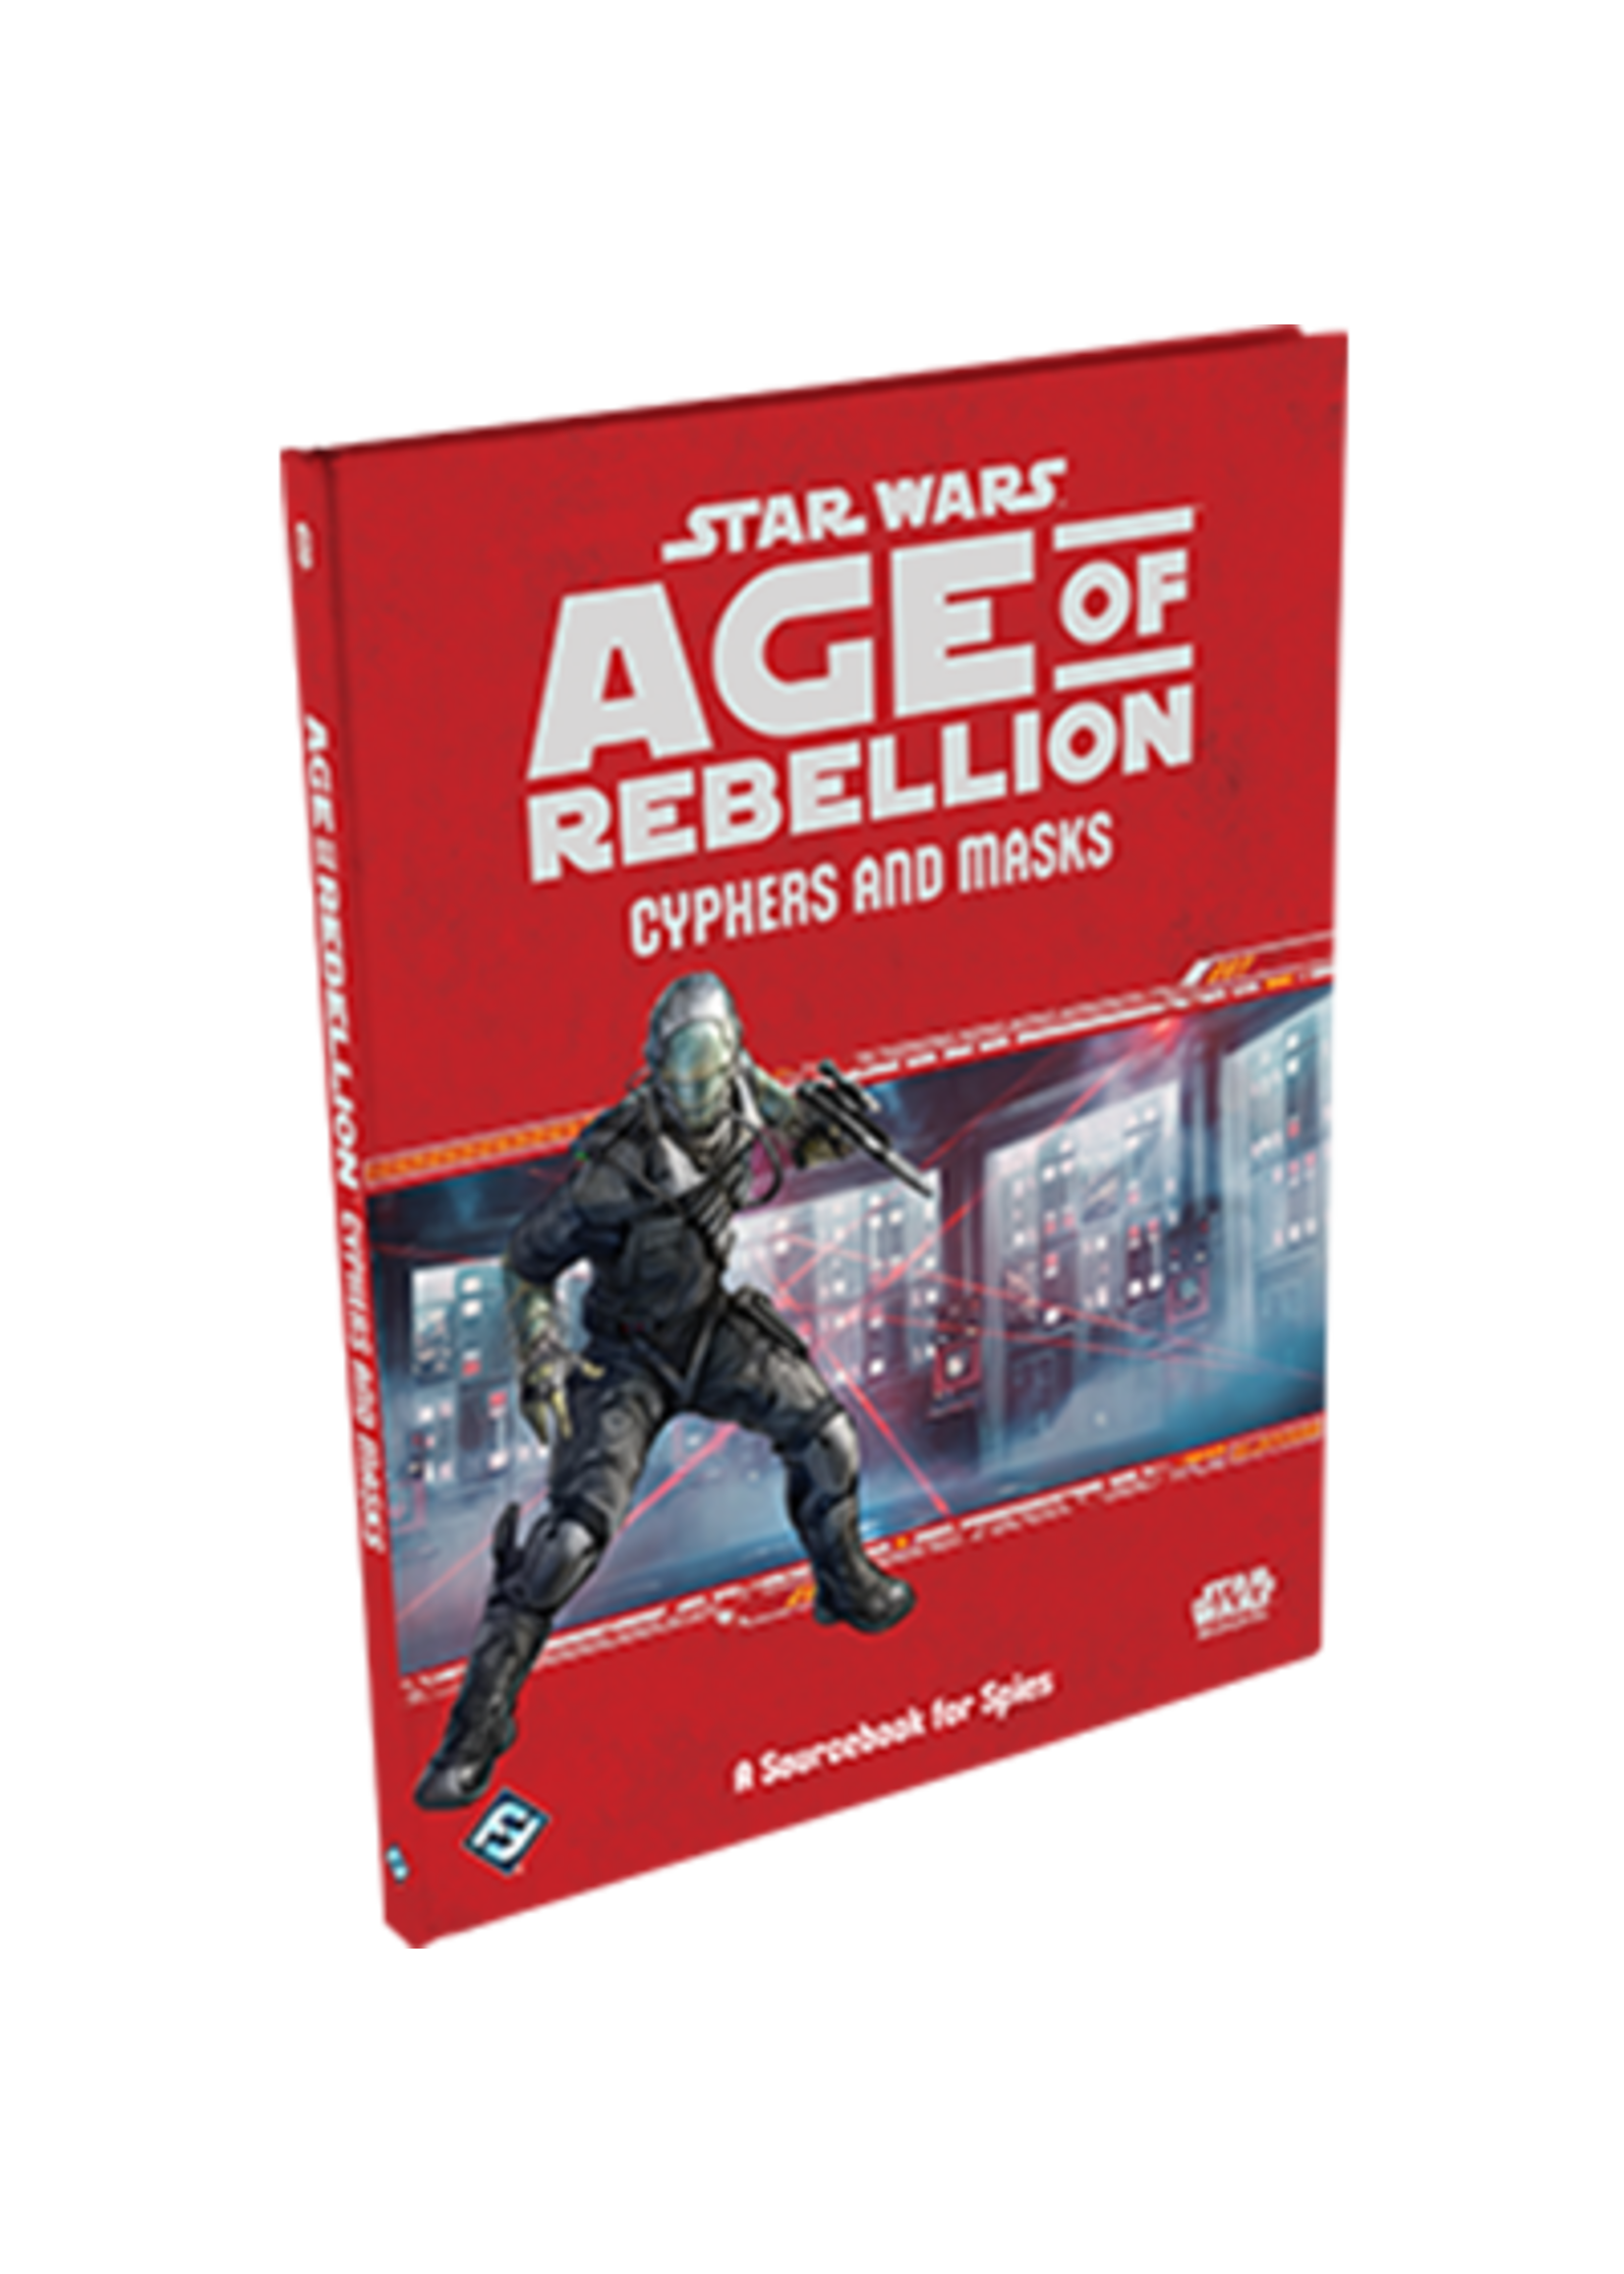 Stars Wars Age of Rebellion Cyphers and Masks